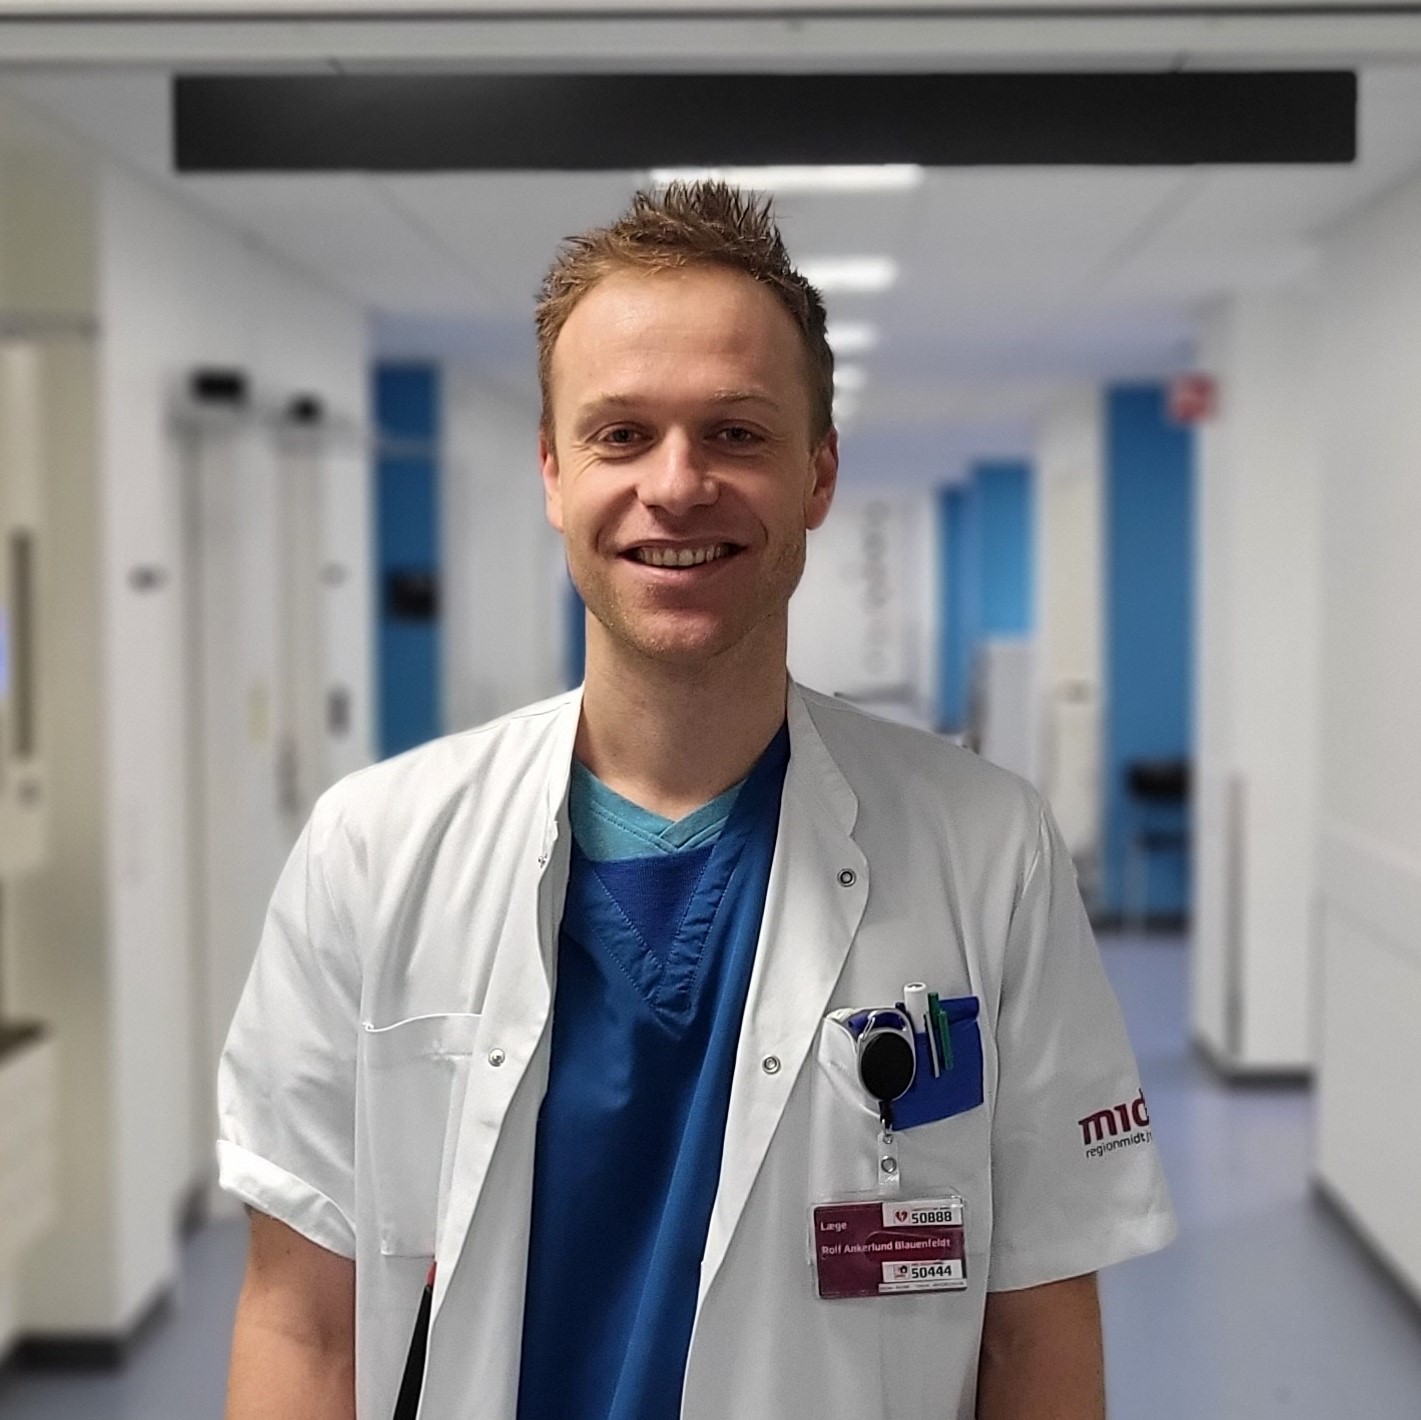 Rolf Blauenfeldt graduated as a medical doctor from Aarhus University, and he has been involved in several research projects in parallel with his training as a medical specialist and later as a PhD student.